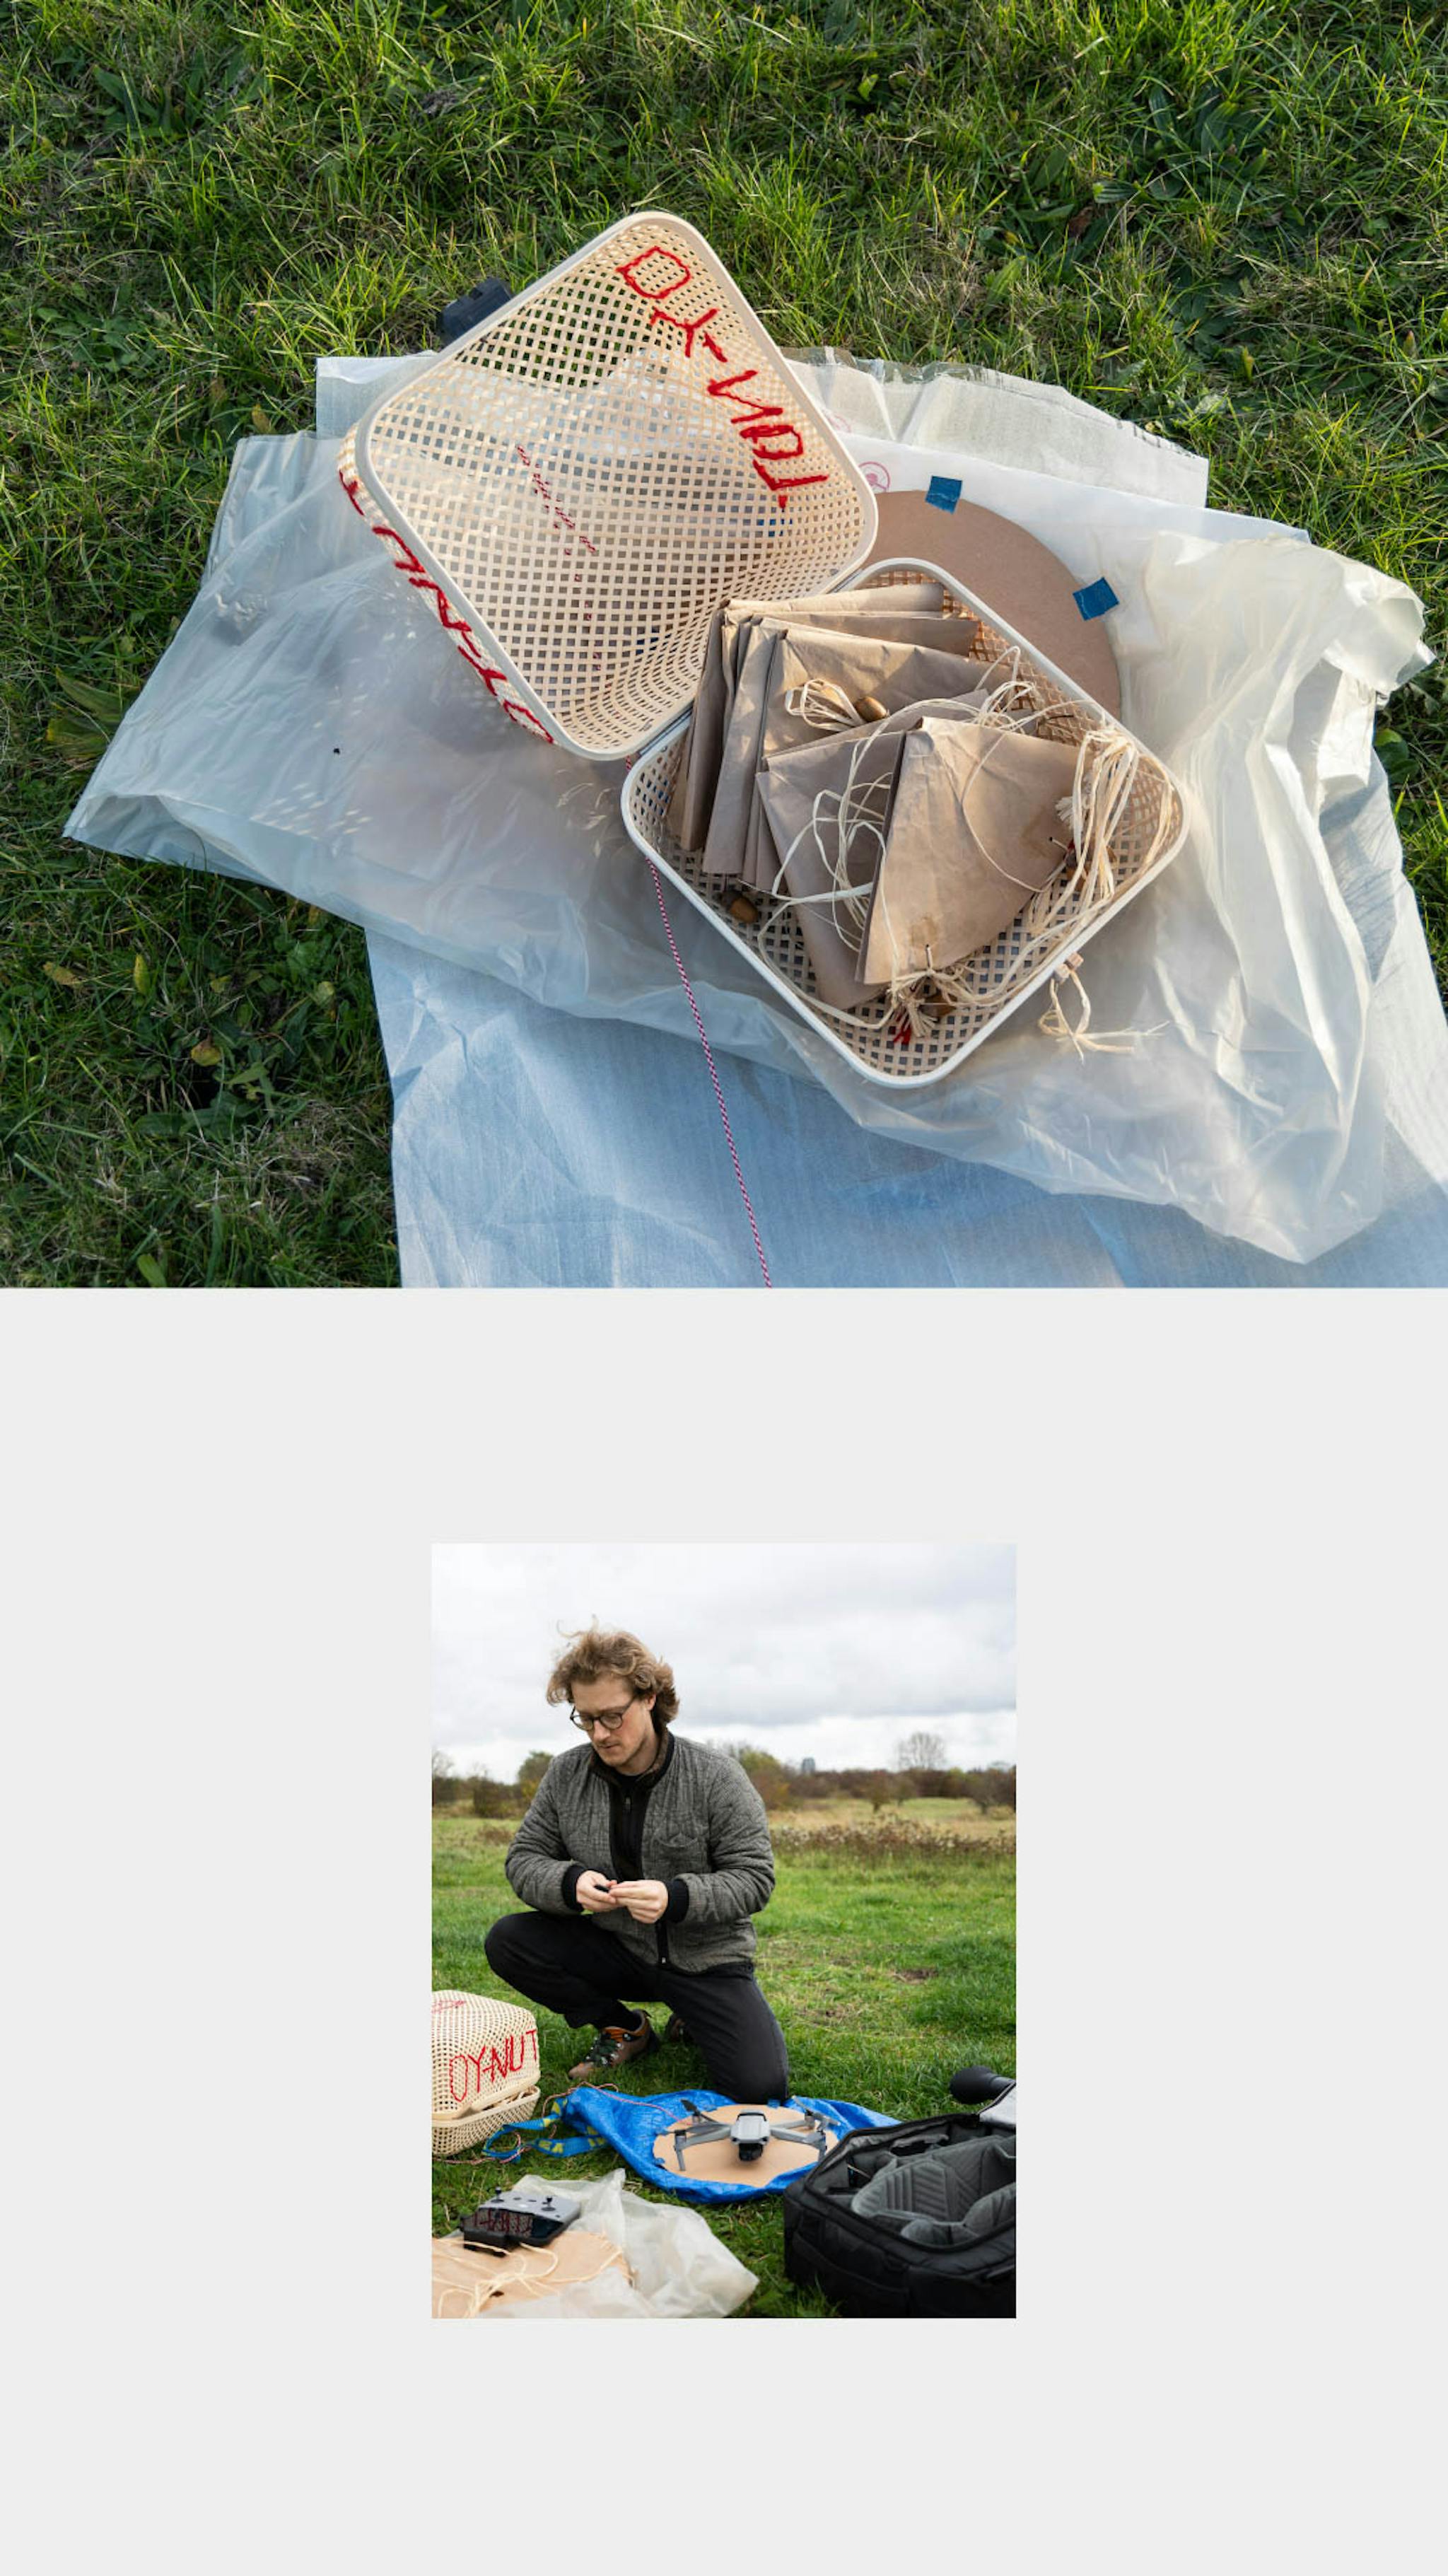 Two images: on the top features an open basket filled with paper parachutes. On the bottom a man is assembling the parachutes on a blue tarp. 